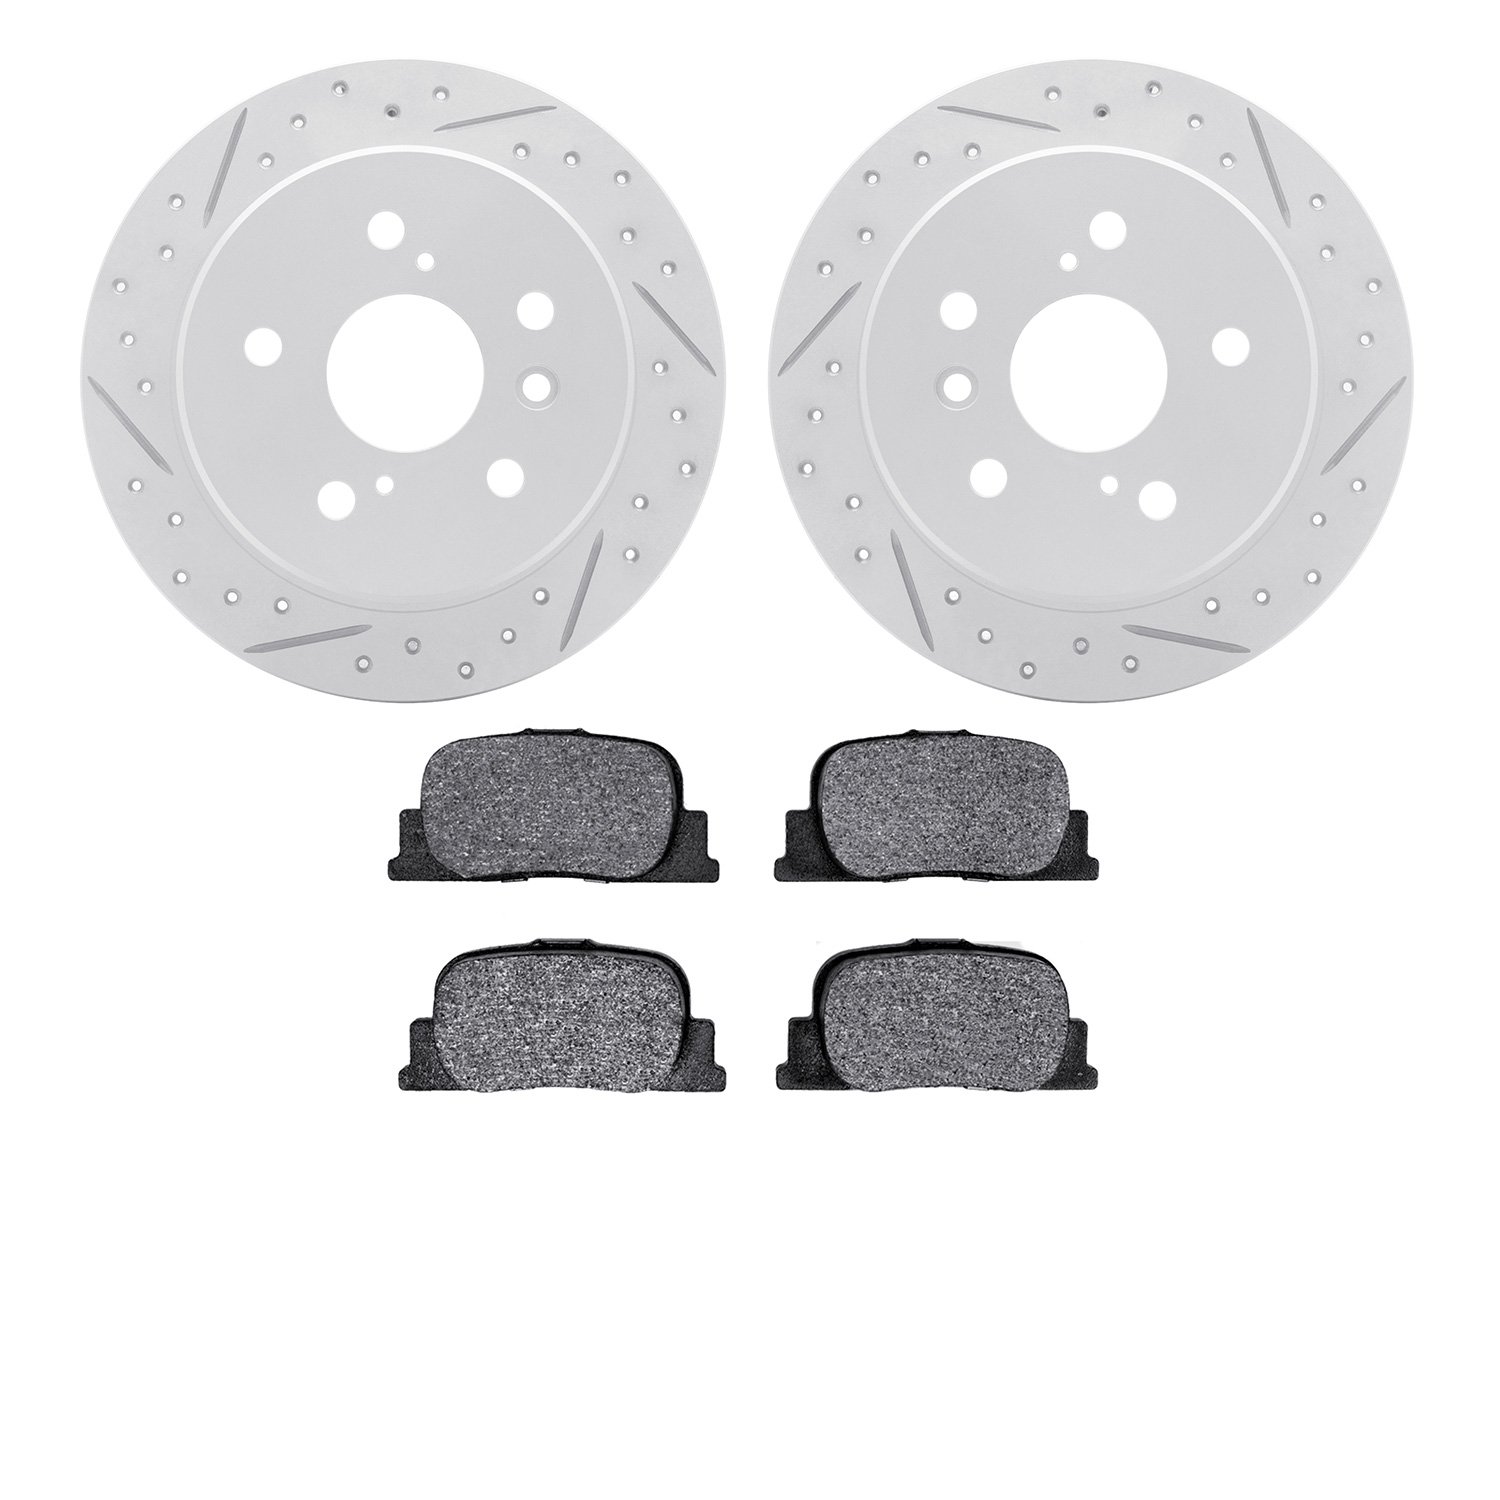 2502-76006 Geoperformance Drilled/Slotted Rotors w/5000 Advanced Brake Pads Kit, 2000-2001 Lexus/Toyota/Scion, Position: Rear